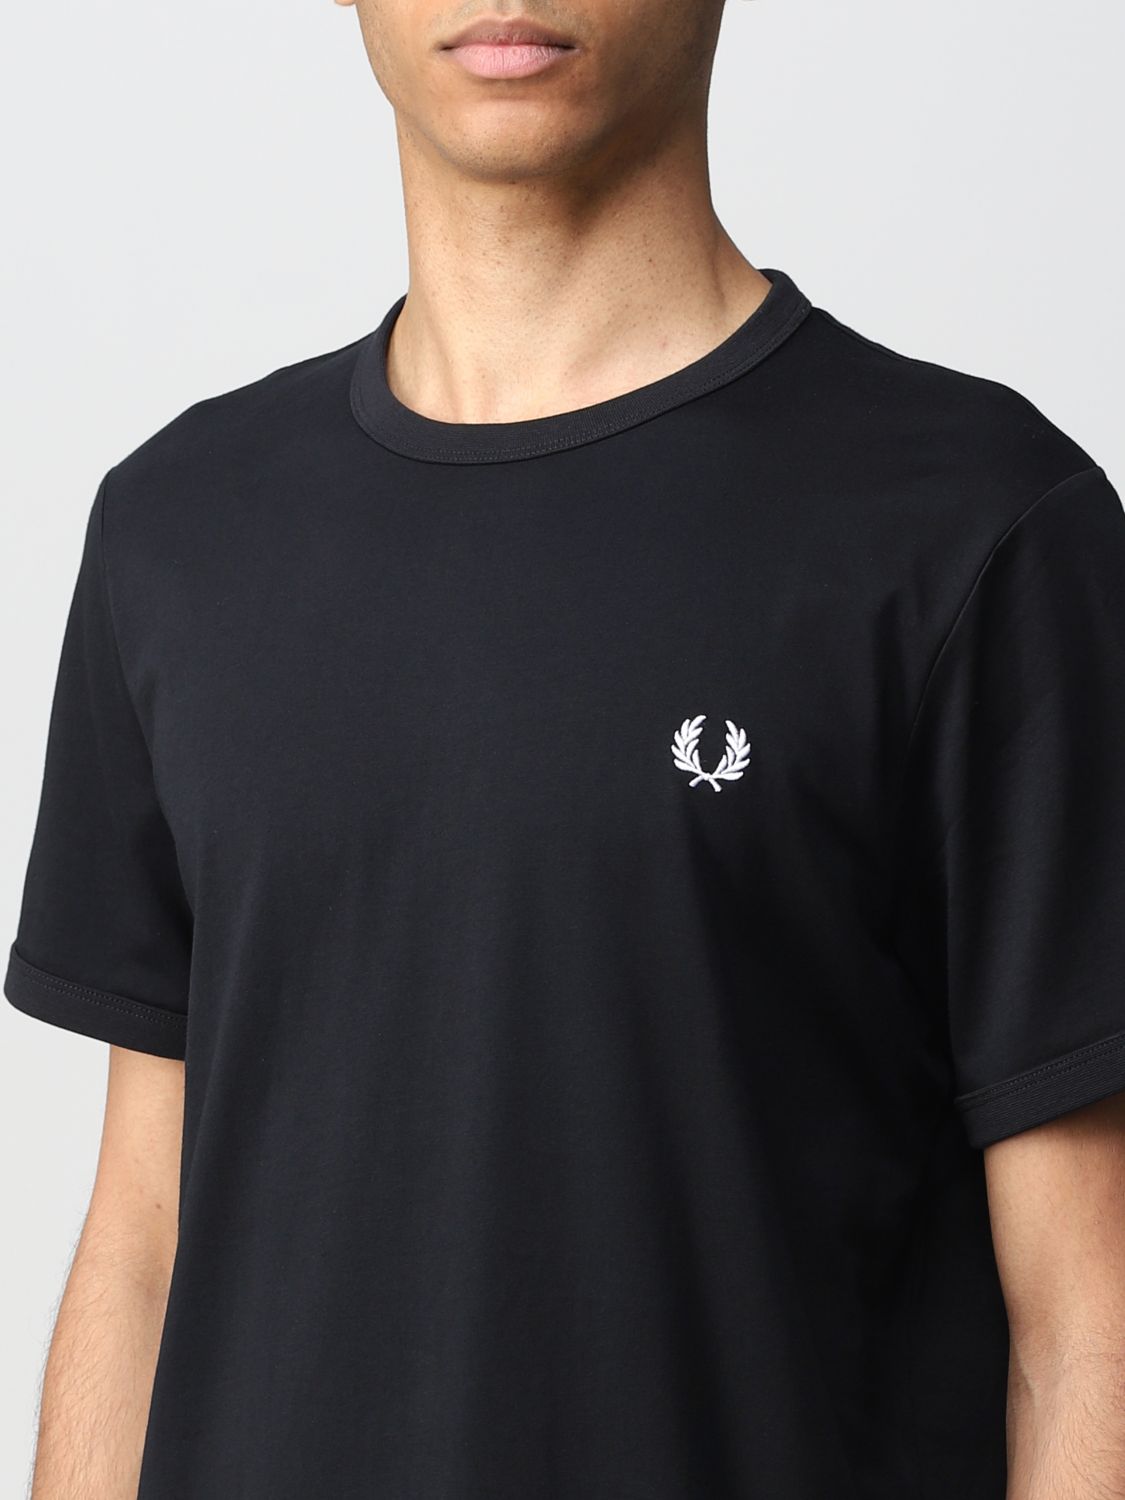 T-shirt Fred Perry: T-shirt Fred Perry homme noir 3